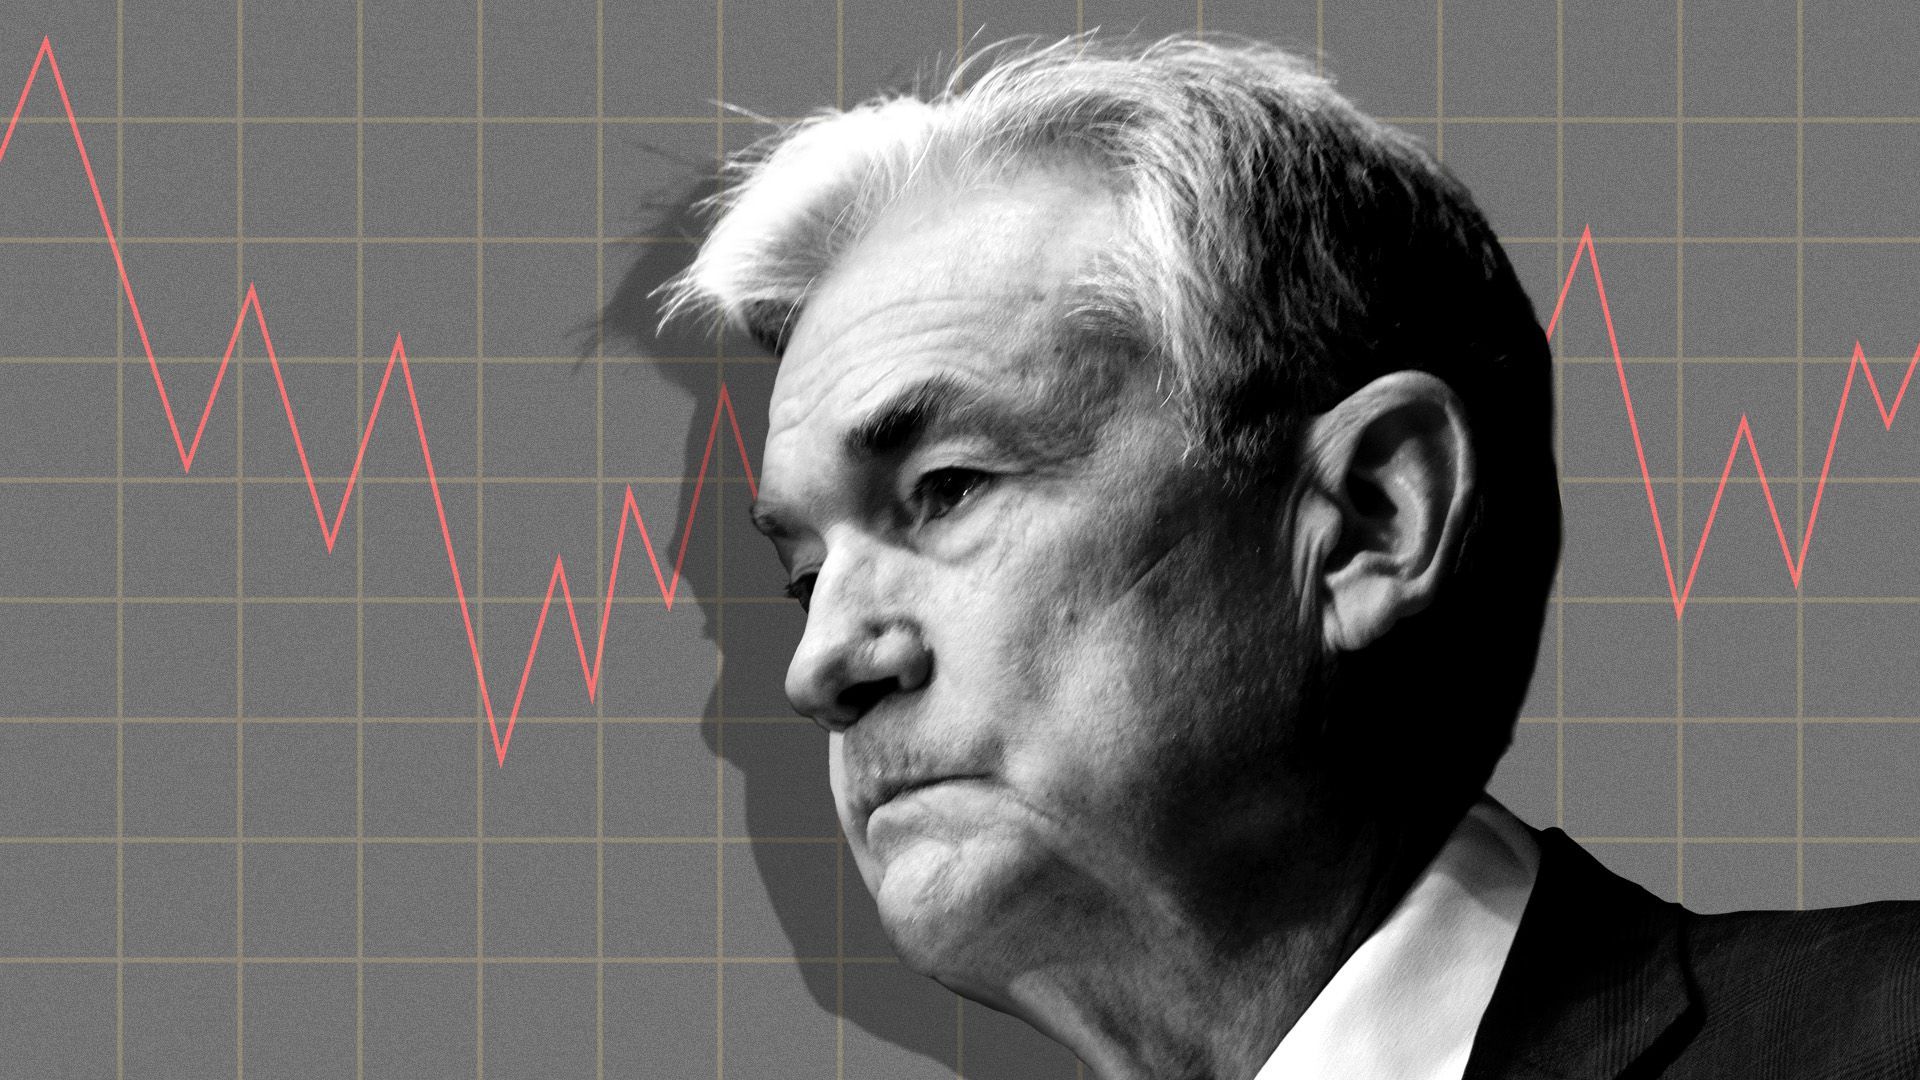 Photo illustration of Fed Chairman Jerome Powell casting a shadow on a stock chart